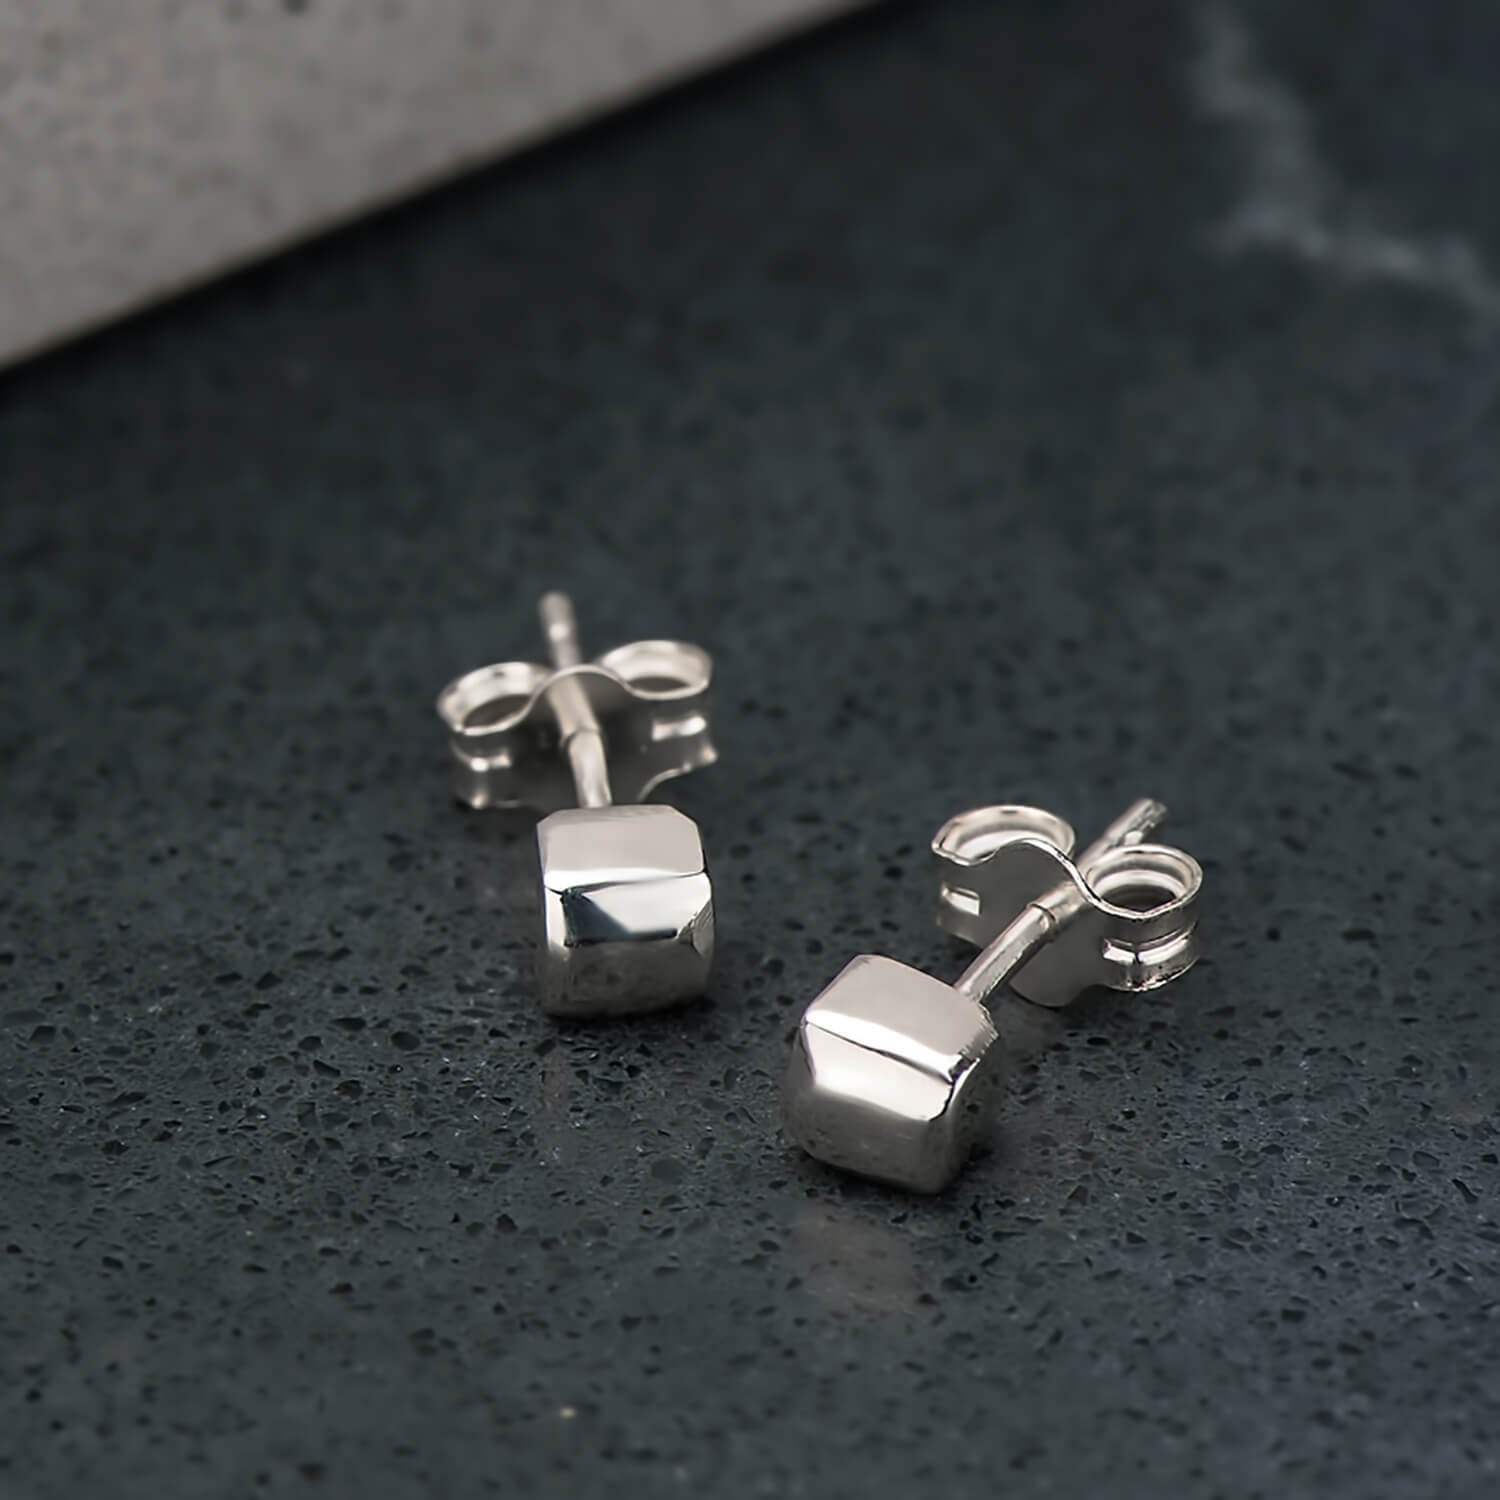 Recycled sterling silver tetragonal studs, they are cubic shaped and brought to a mirror polished finish.